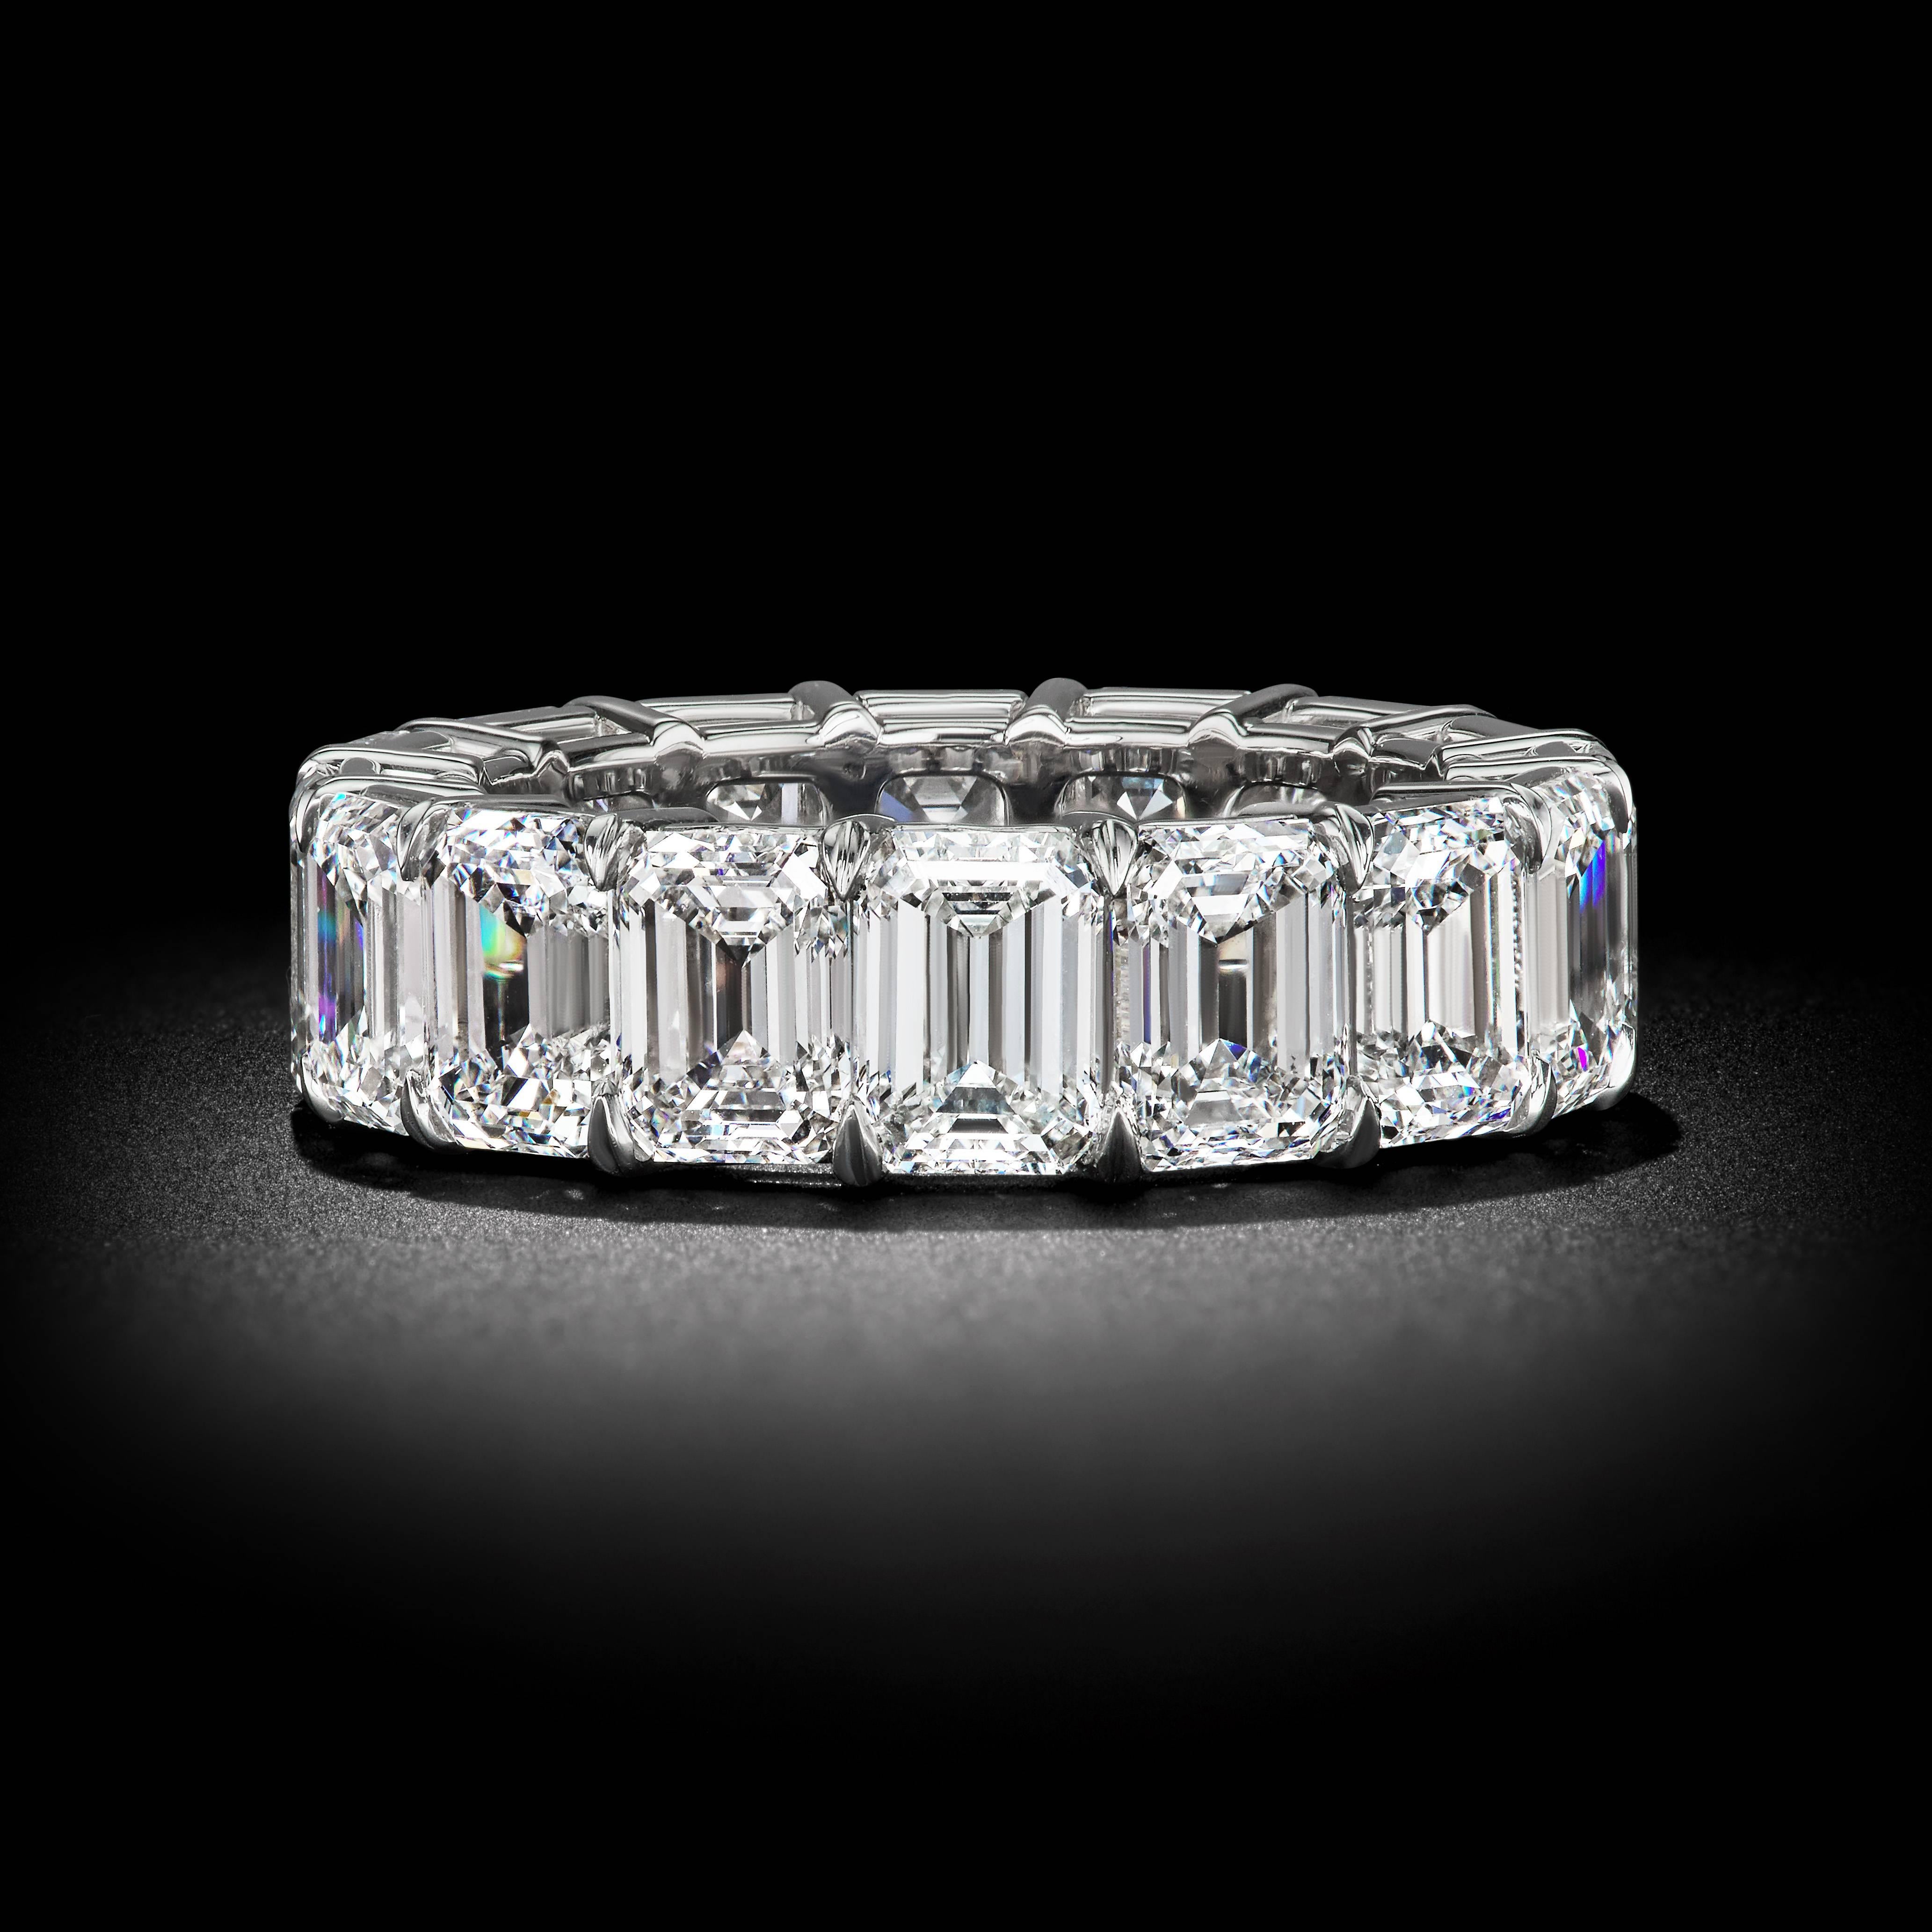 A Rosenberg Diamonds perfectly matched emerald cut eternity band. This internally flawless diamond band has a total weight of 15.41 carats. Set in a beautifully platinum setting with color ranging from G-H with a clarity VS2. Each stone comes with a